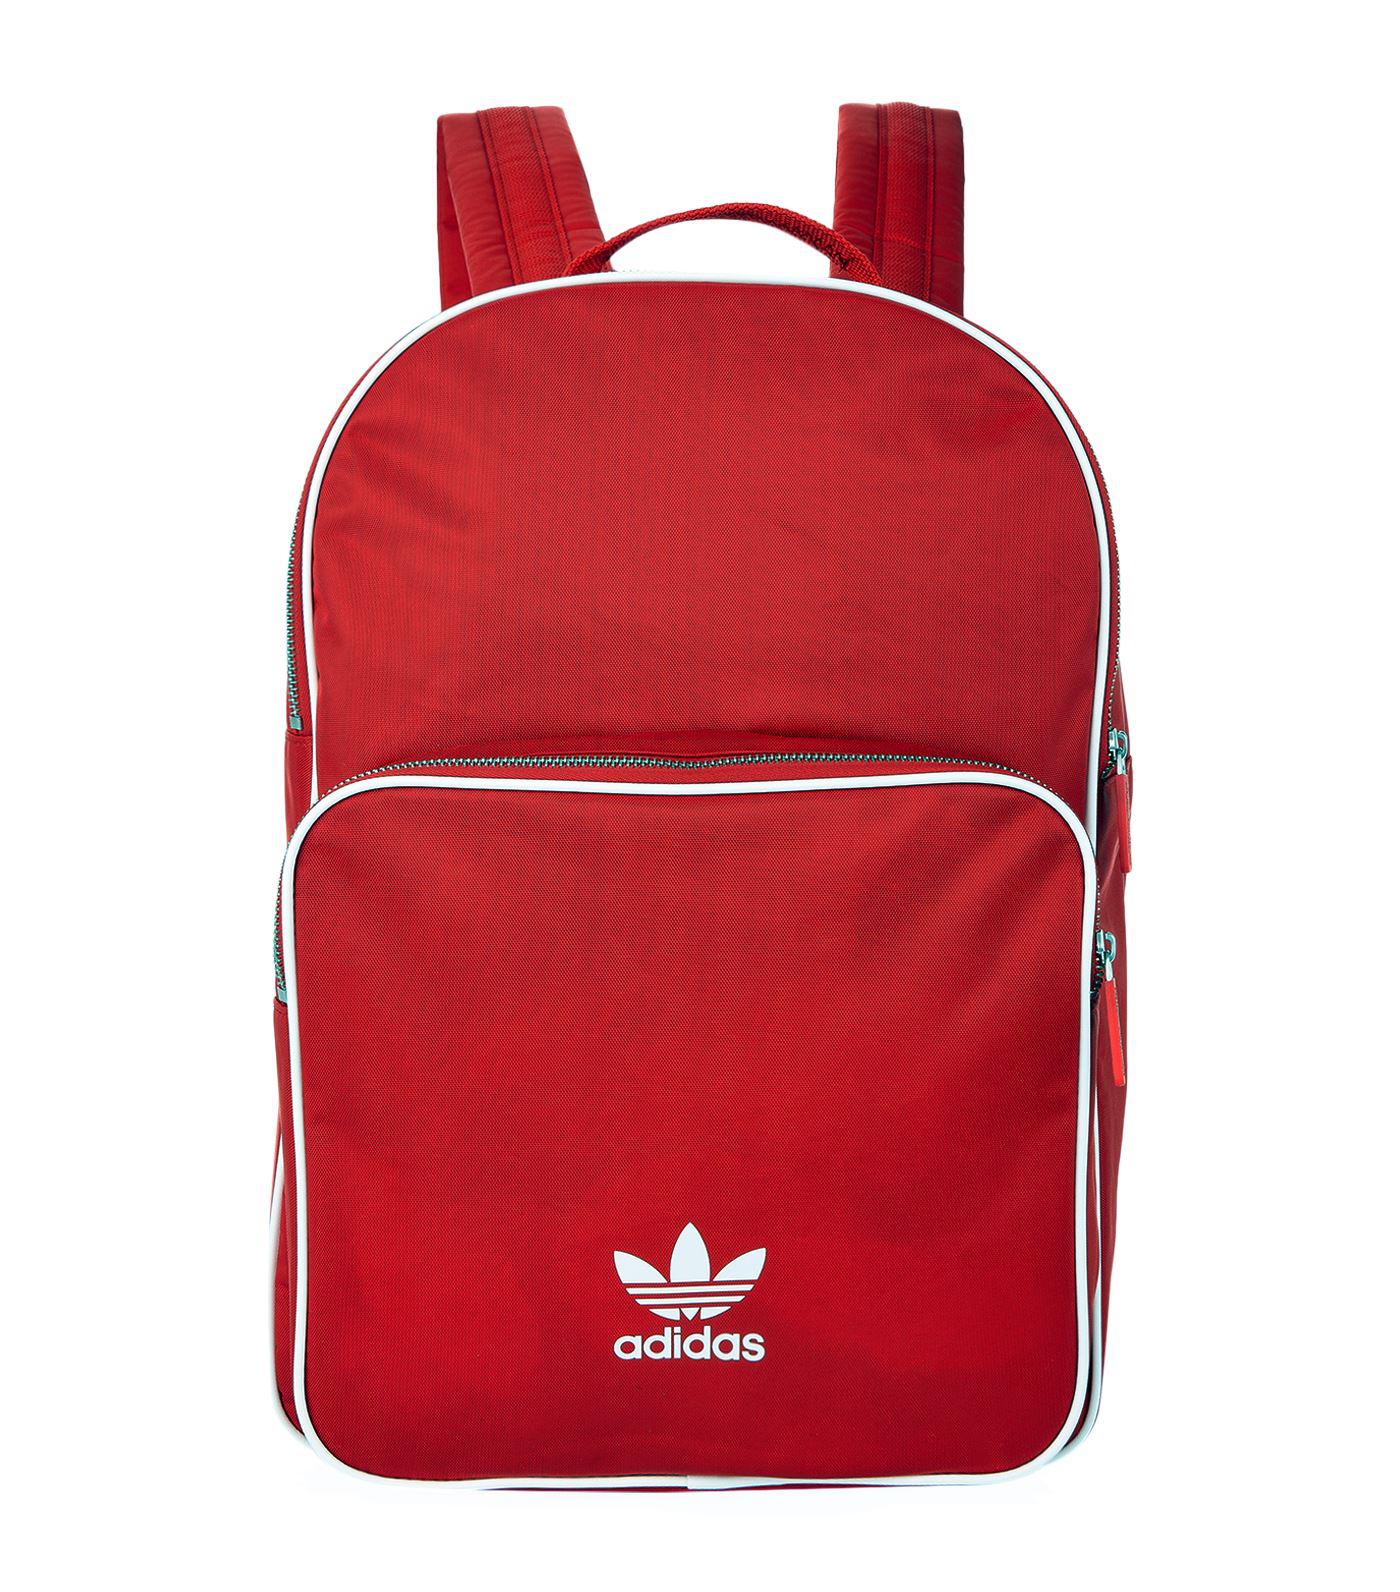 adidas classic backpack red Off 77% - www.loverethymno.com